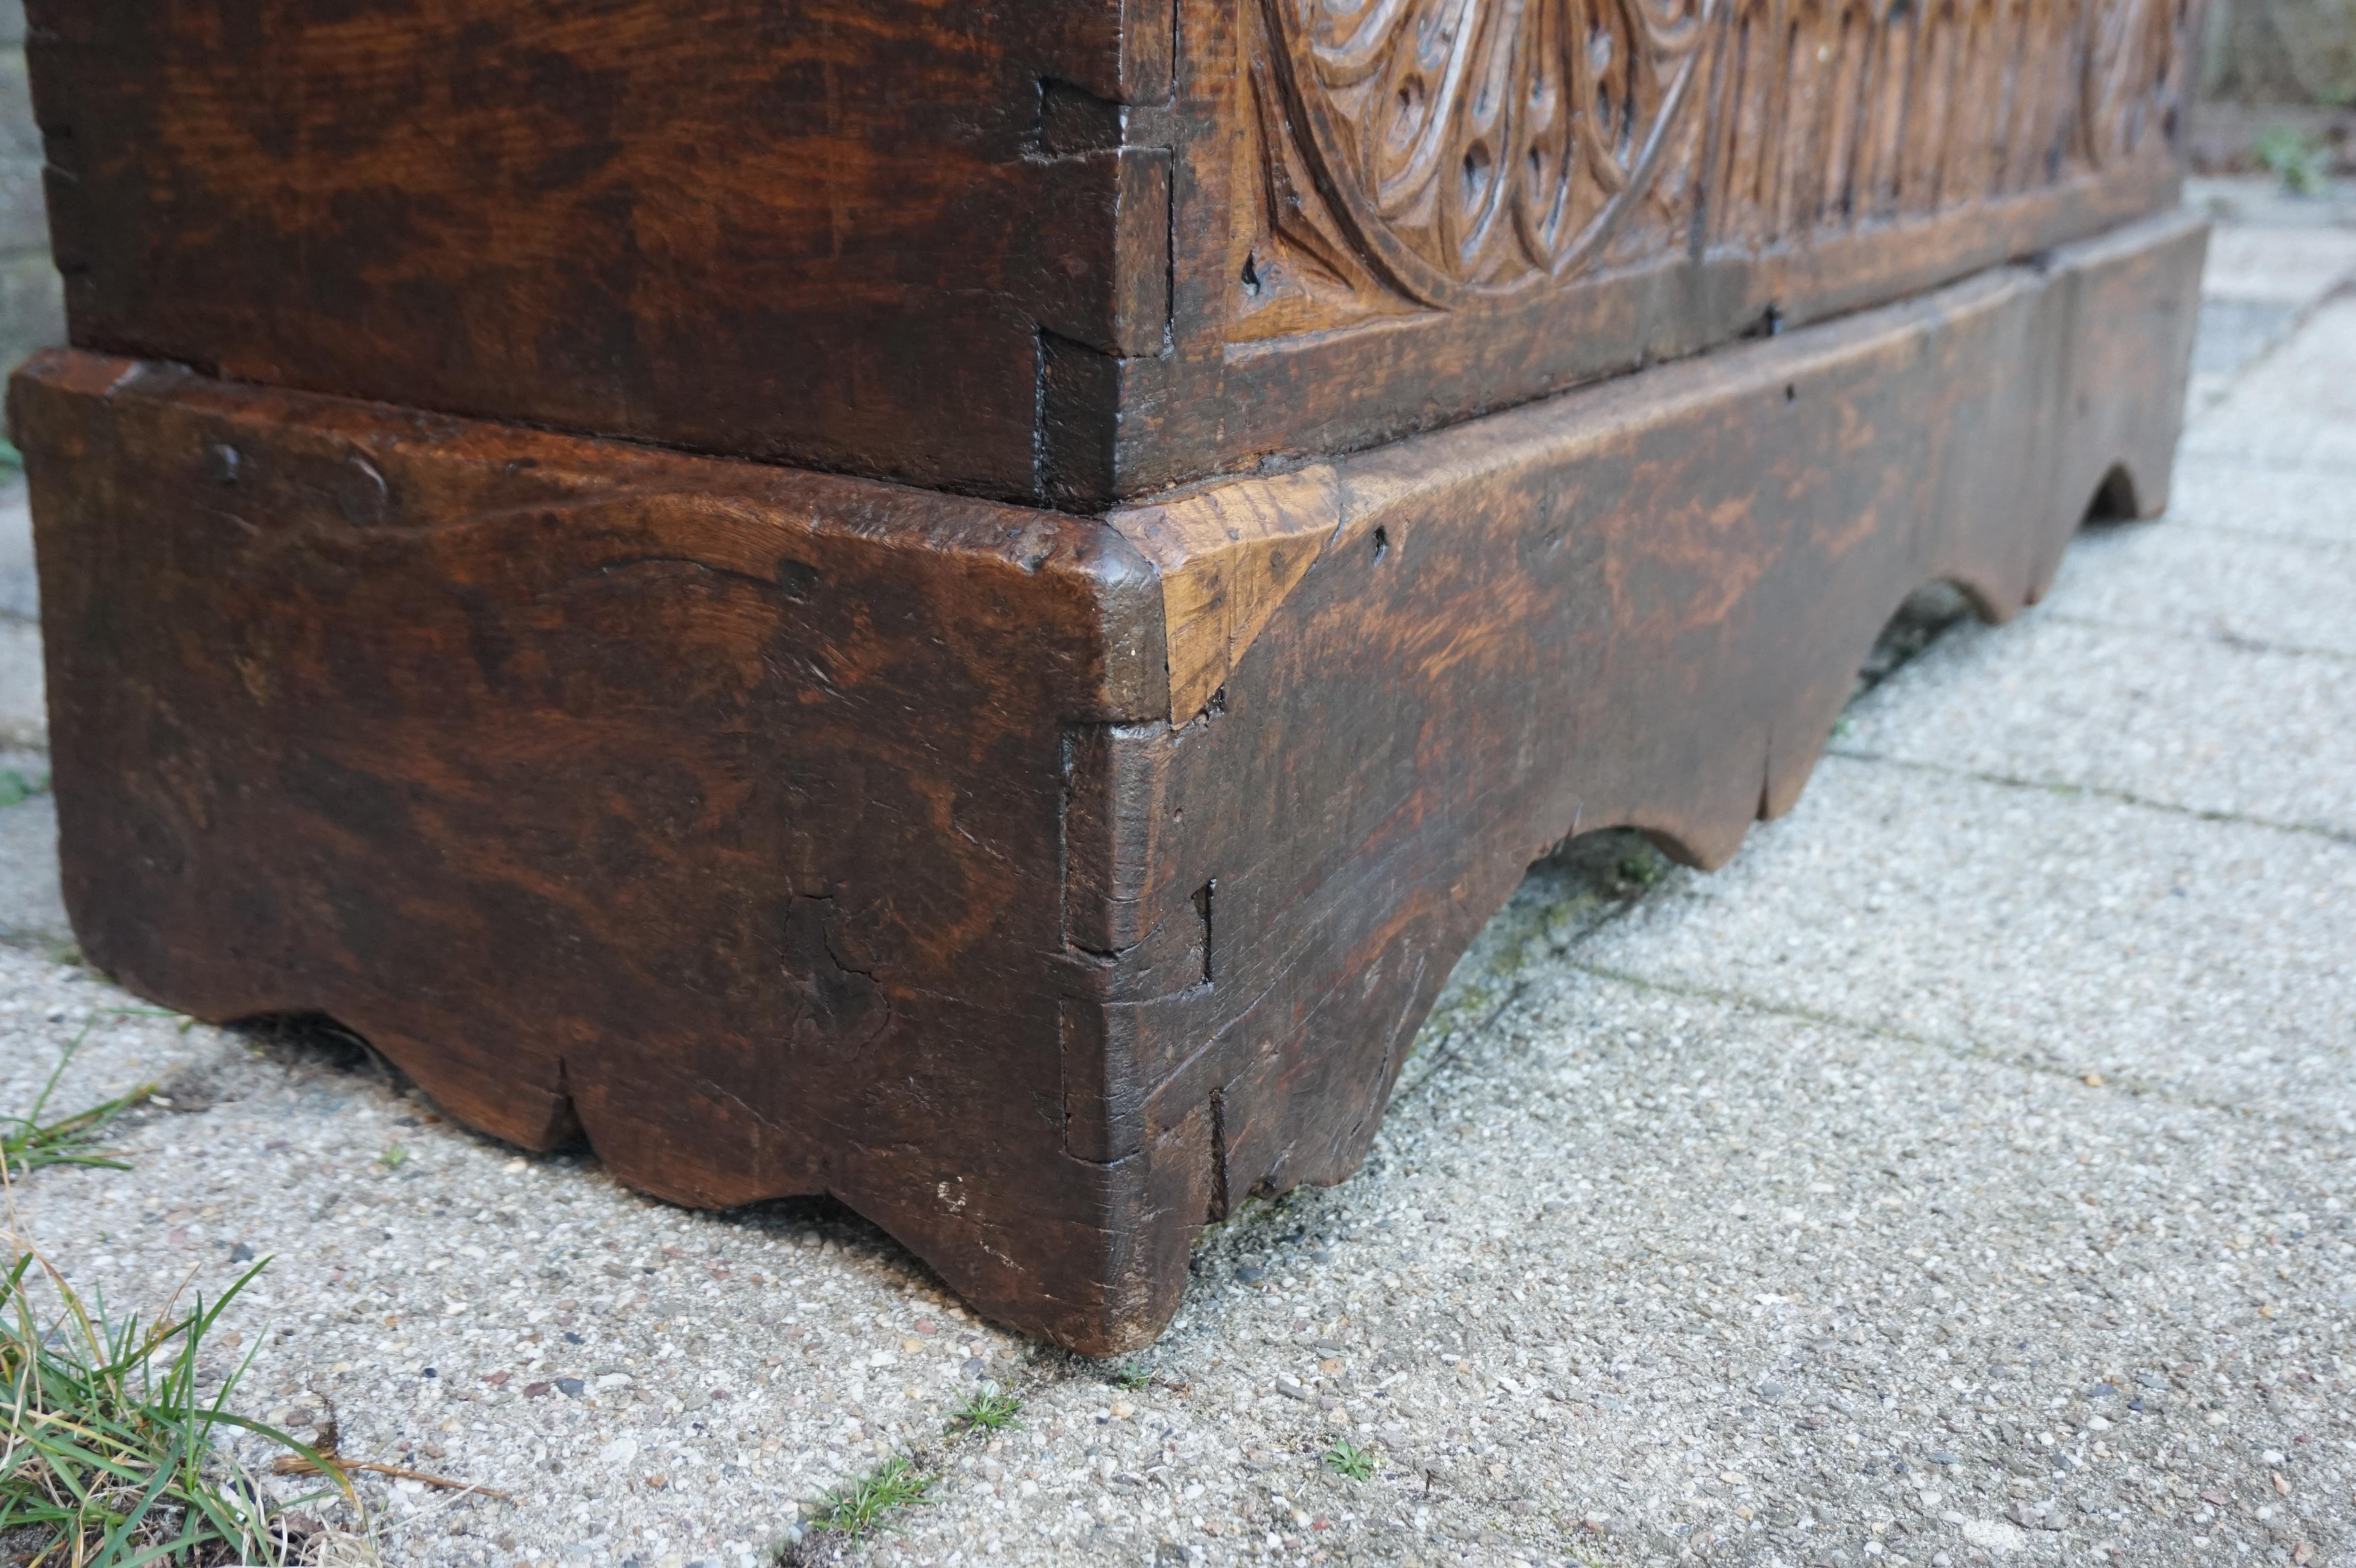 Antique Gothic Revival Blanket Chest / Trunk with an Amazing Patina 1680 - 1720 4